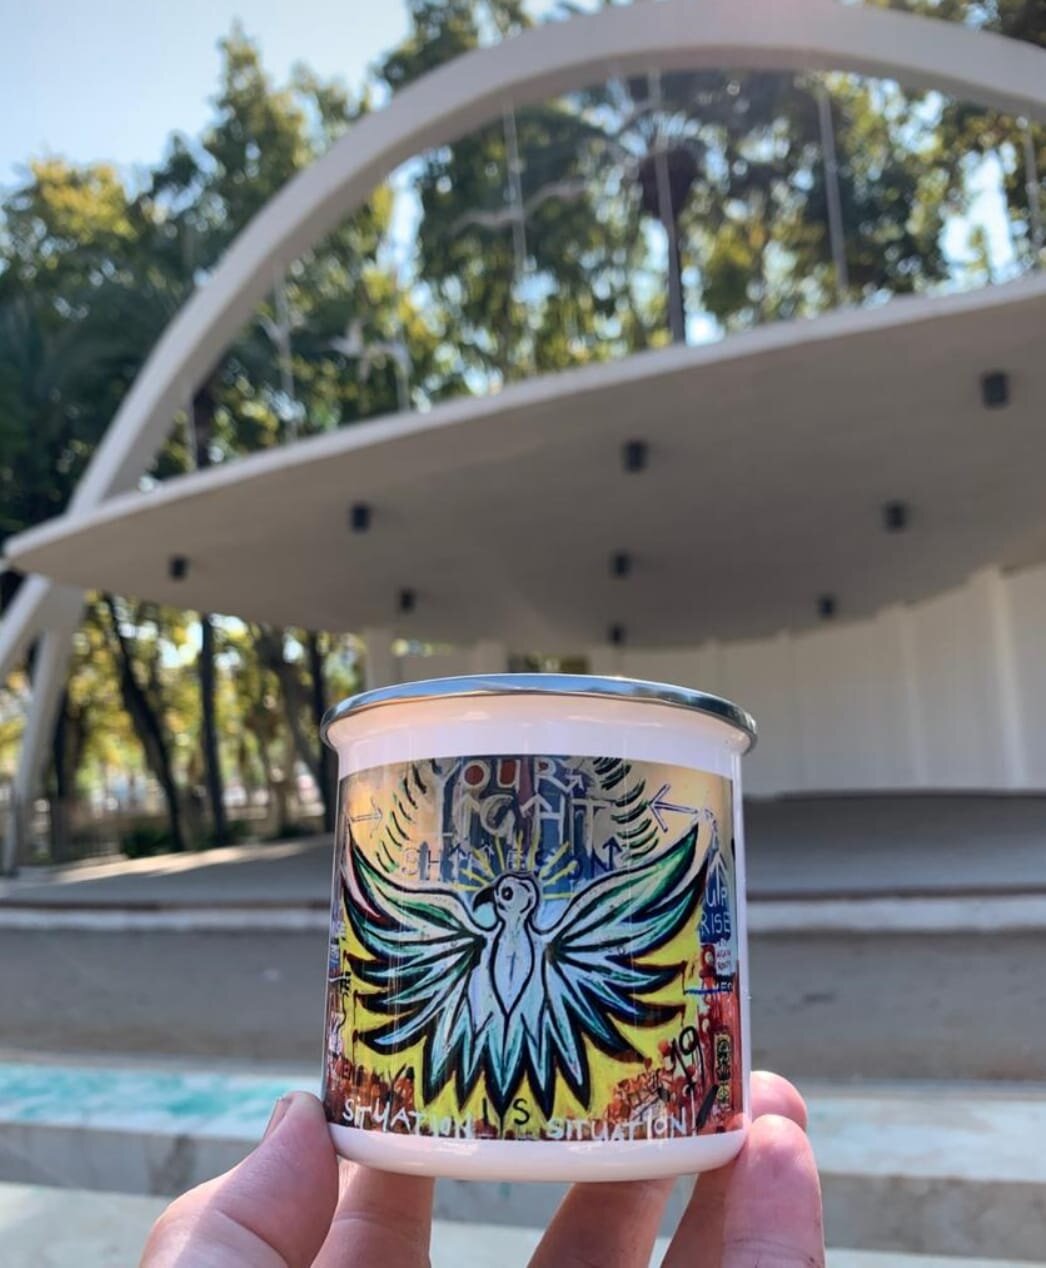 Malaga City Park and Amphitheatre pictured with a "Phoenix Rising" painting cup